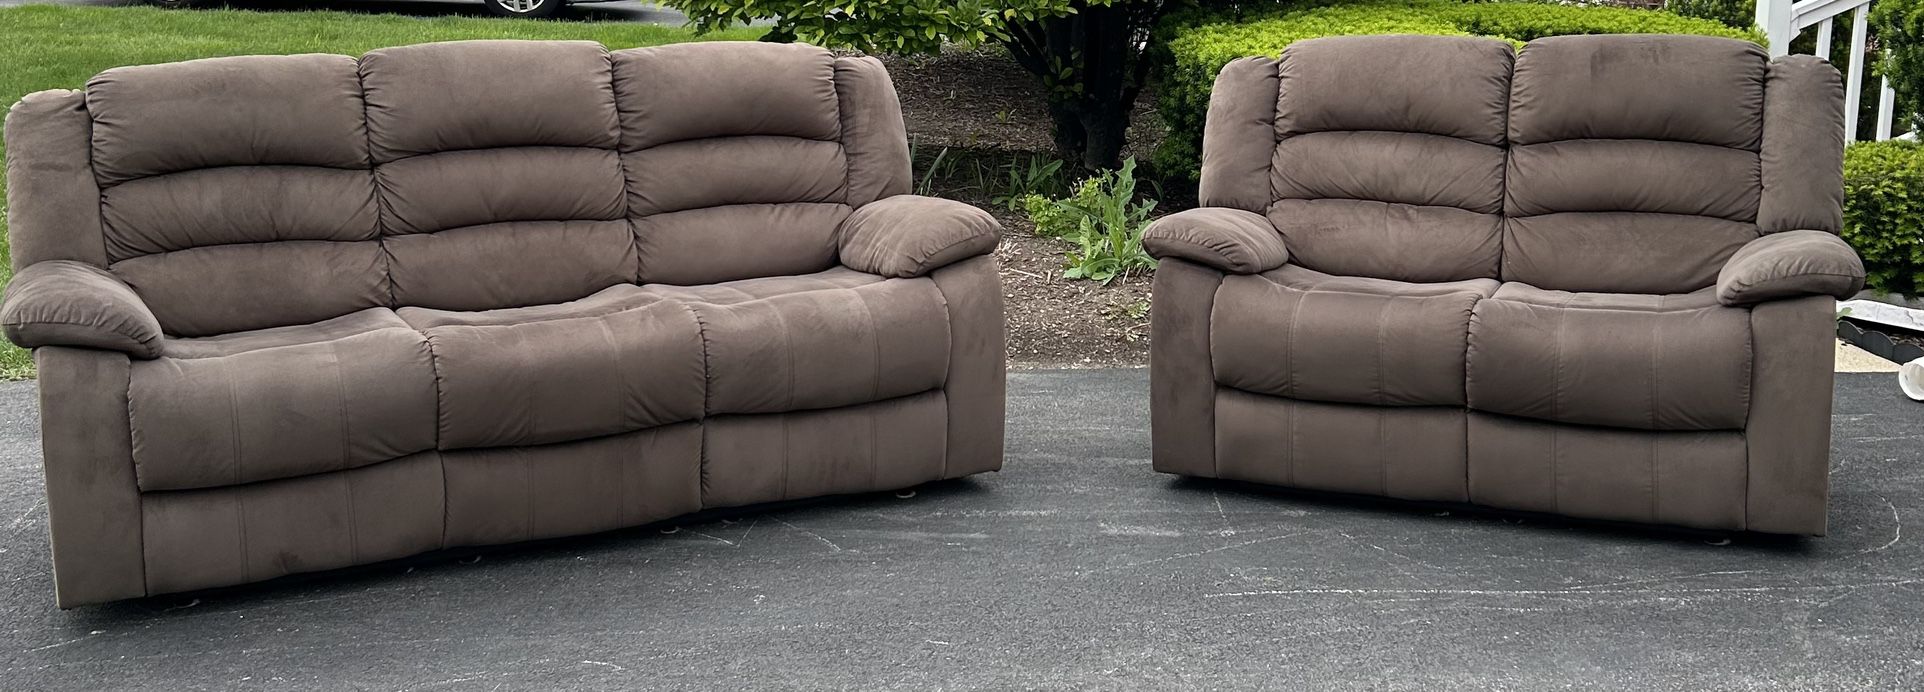 Brown Couch And Loveseat Reclining Set 